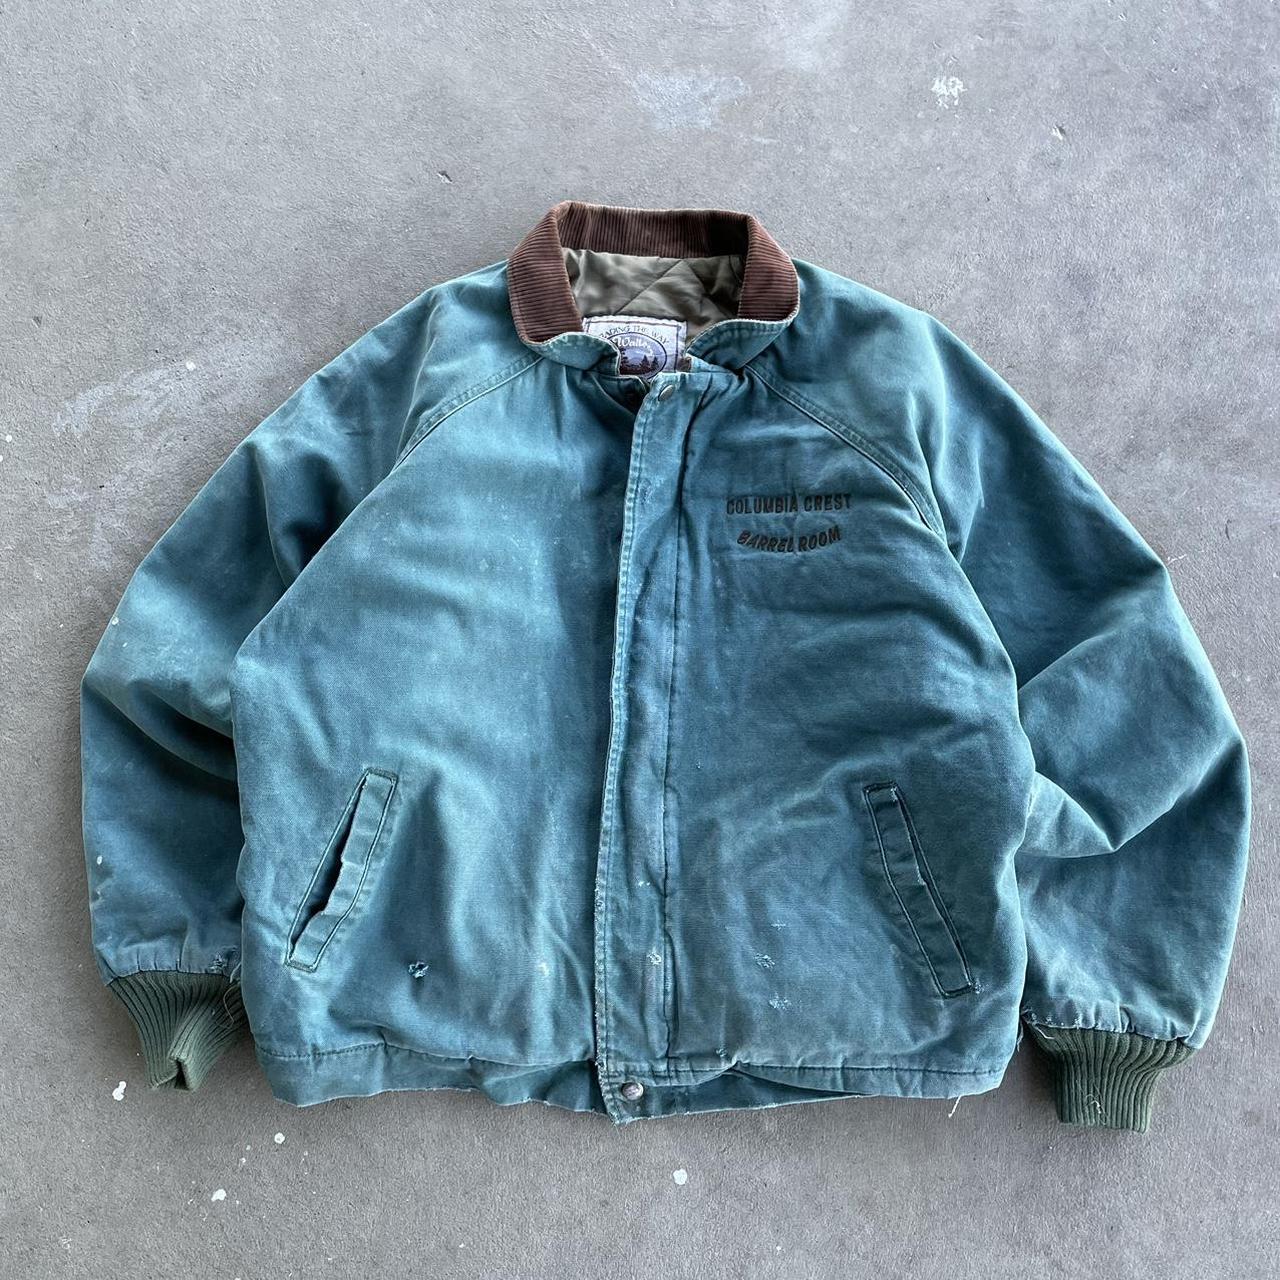 item listed by pnwvintage